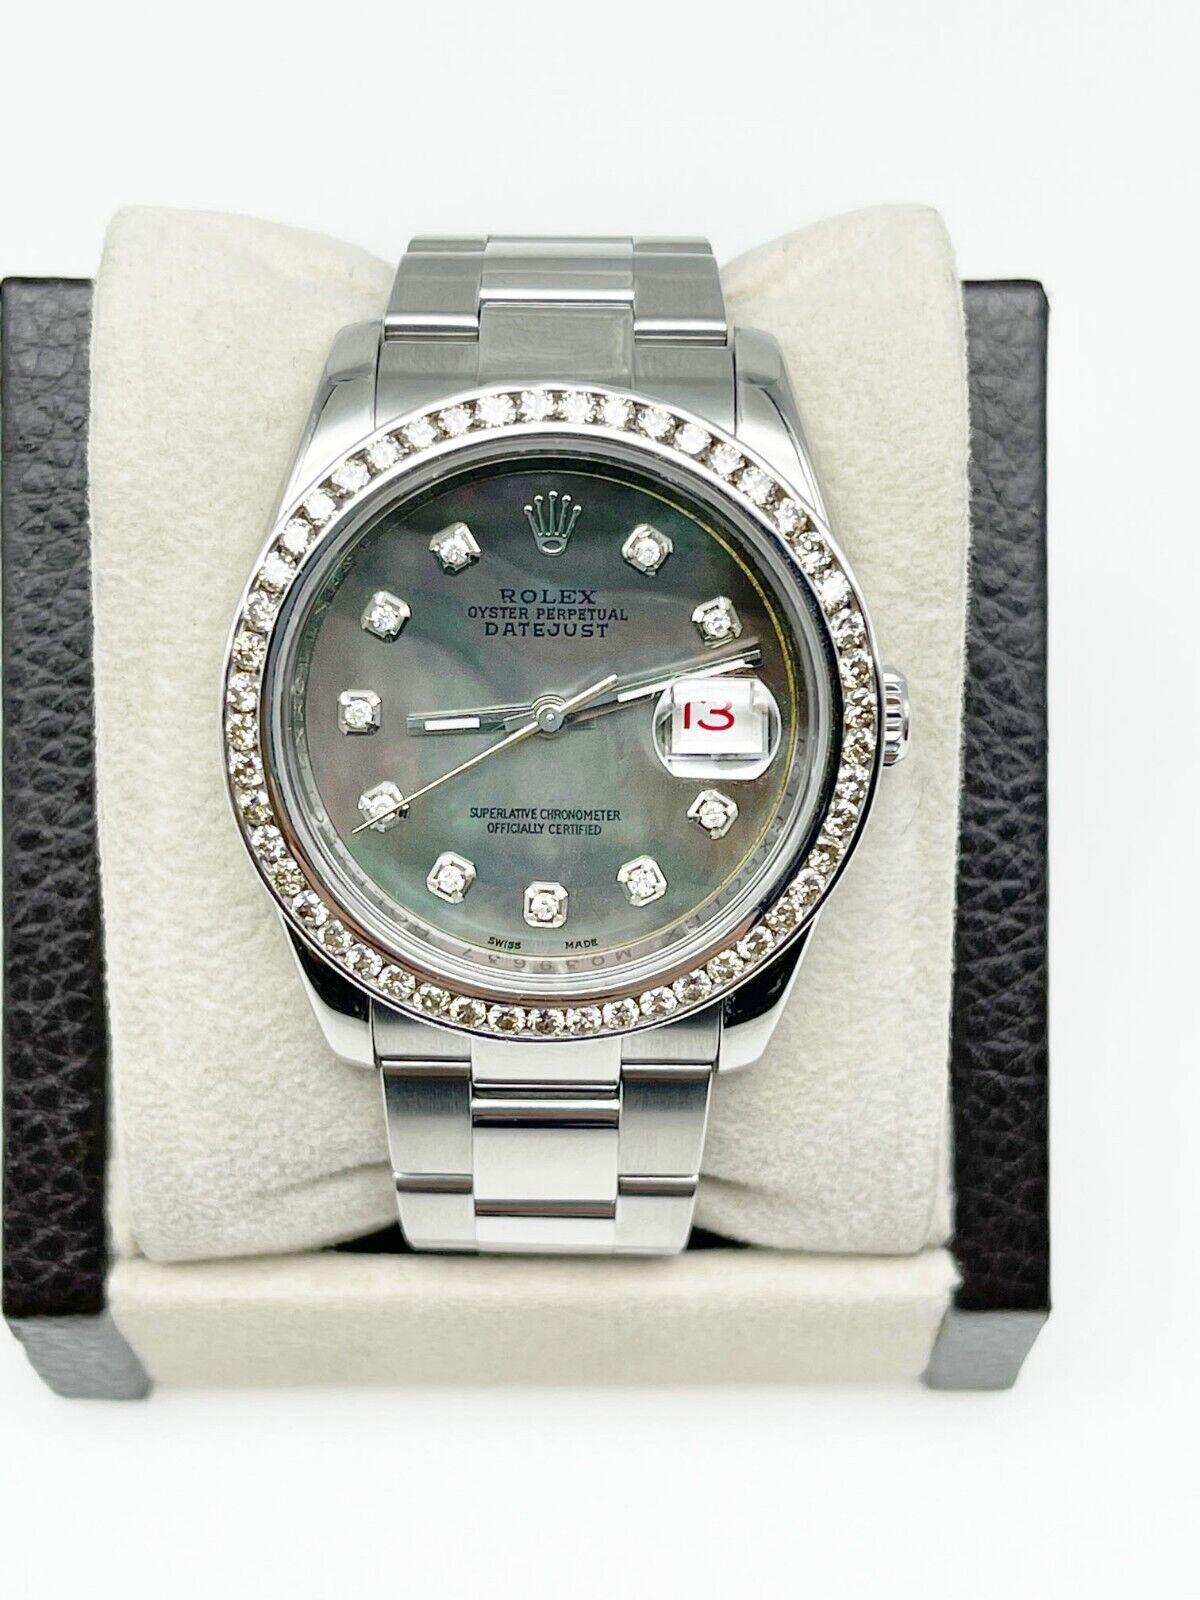 Style Number: 116200

 

Serial: M039***



Year: 2008

 

Model: Datejust

 

Case Material: Stainless Steel

 

Band: Stainless Steel

 

Bezel: Silver Custom Diamond bezel

 

Dial: Custom Black MOP Tahitian Diamond Dial

 

Face: Sapphire